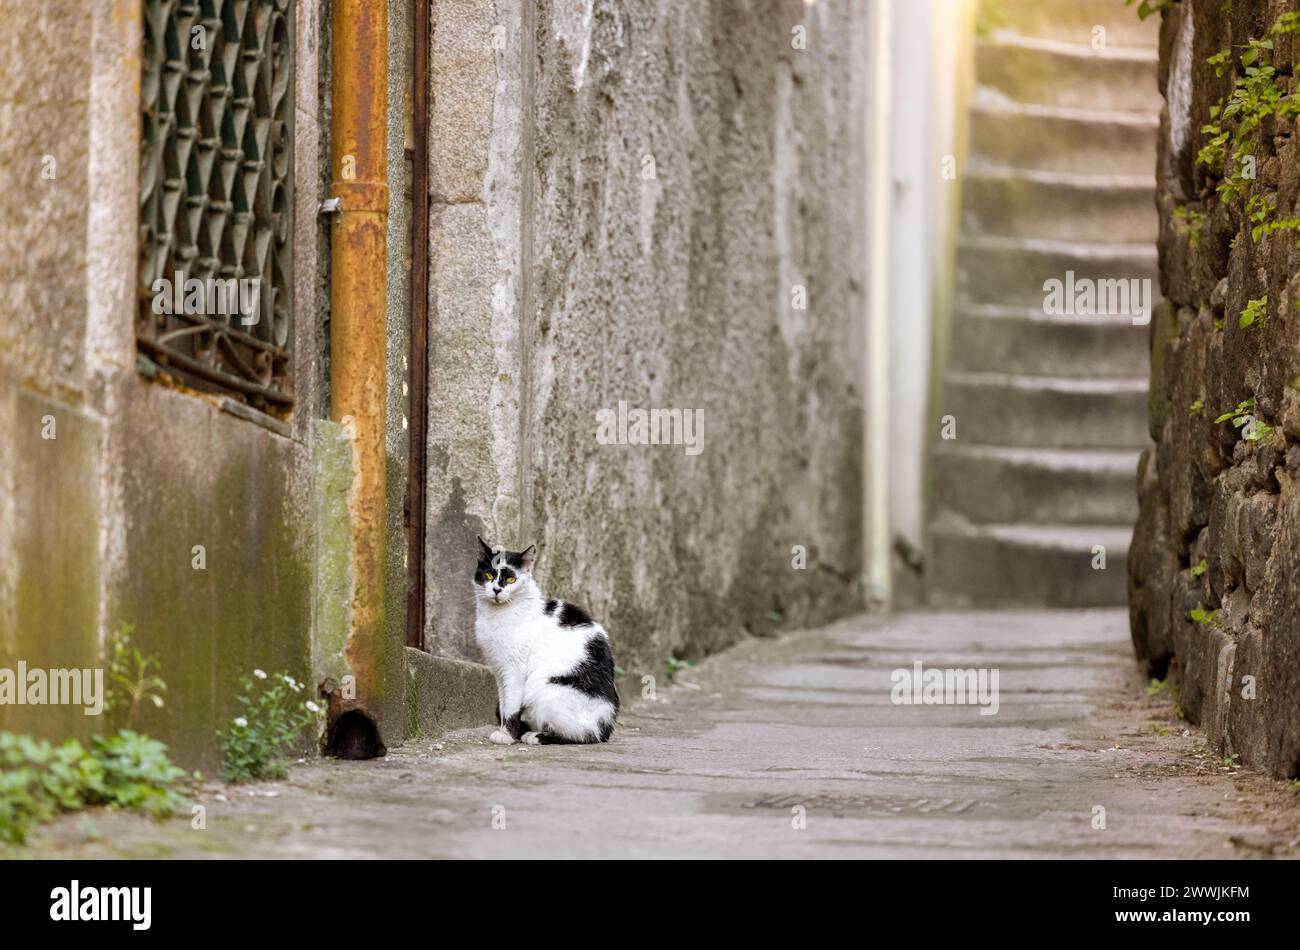 A black and white cat sitting in a stone alley in Portugal. Stock Photo